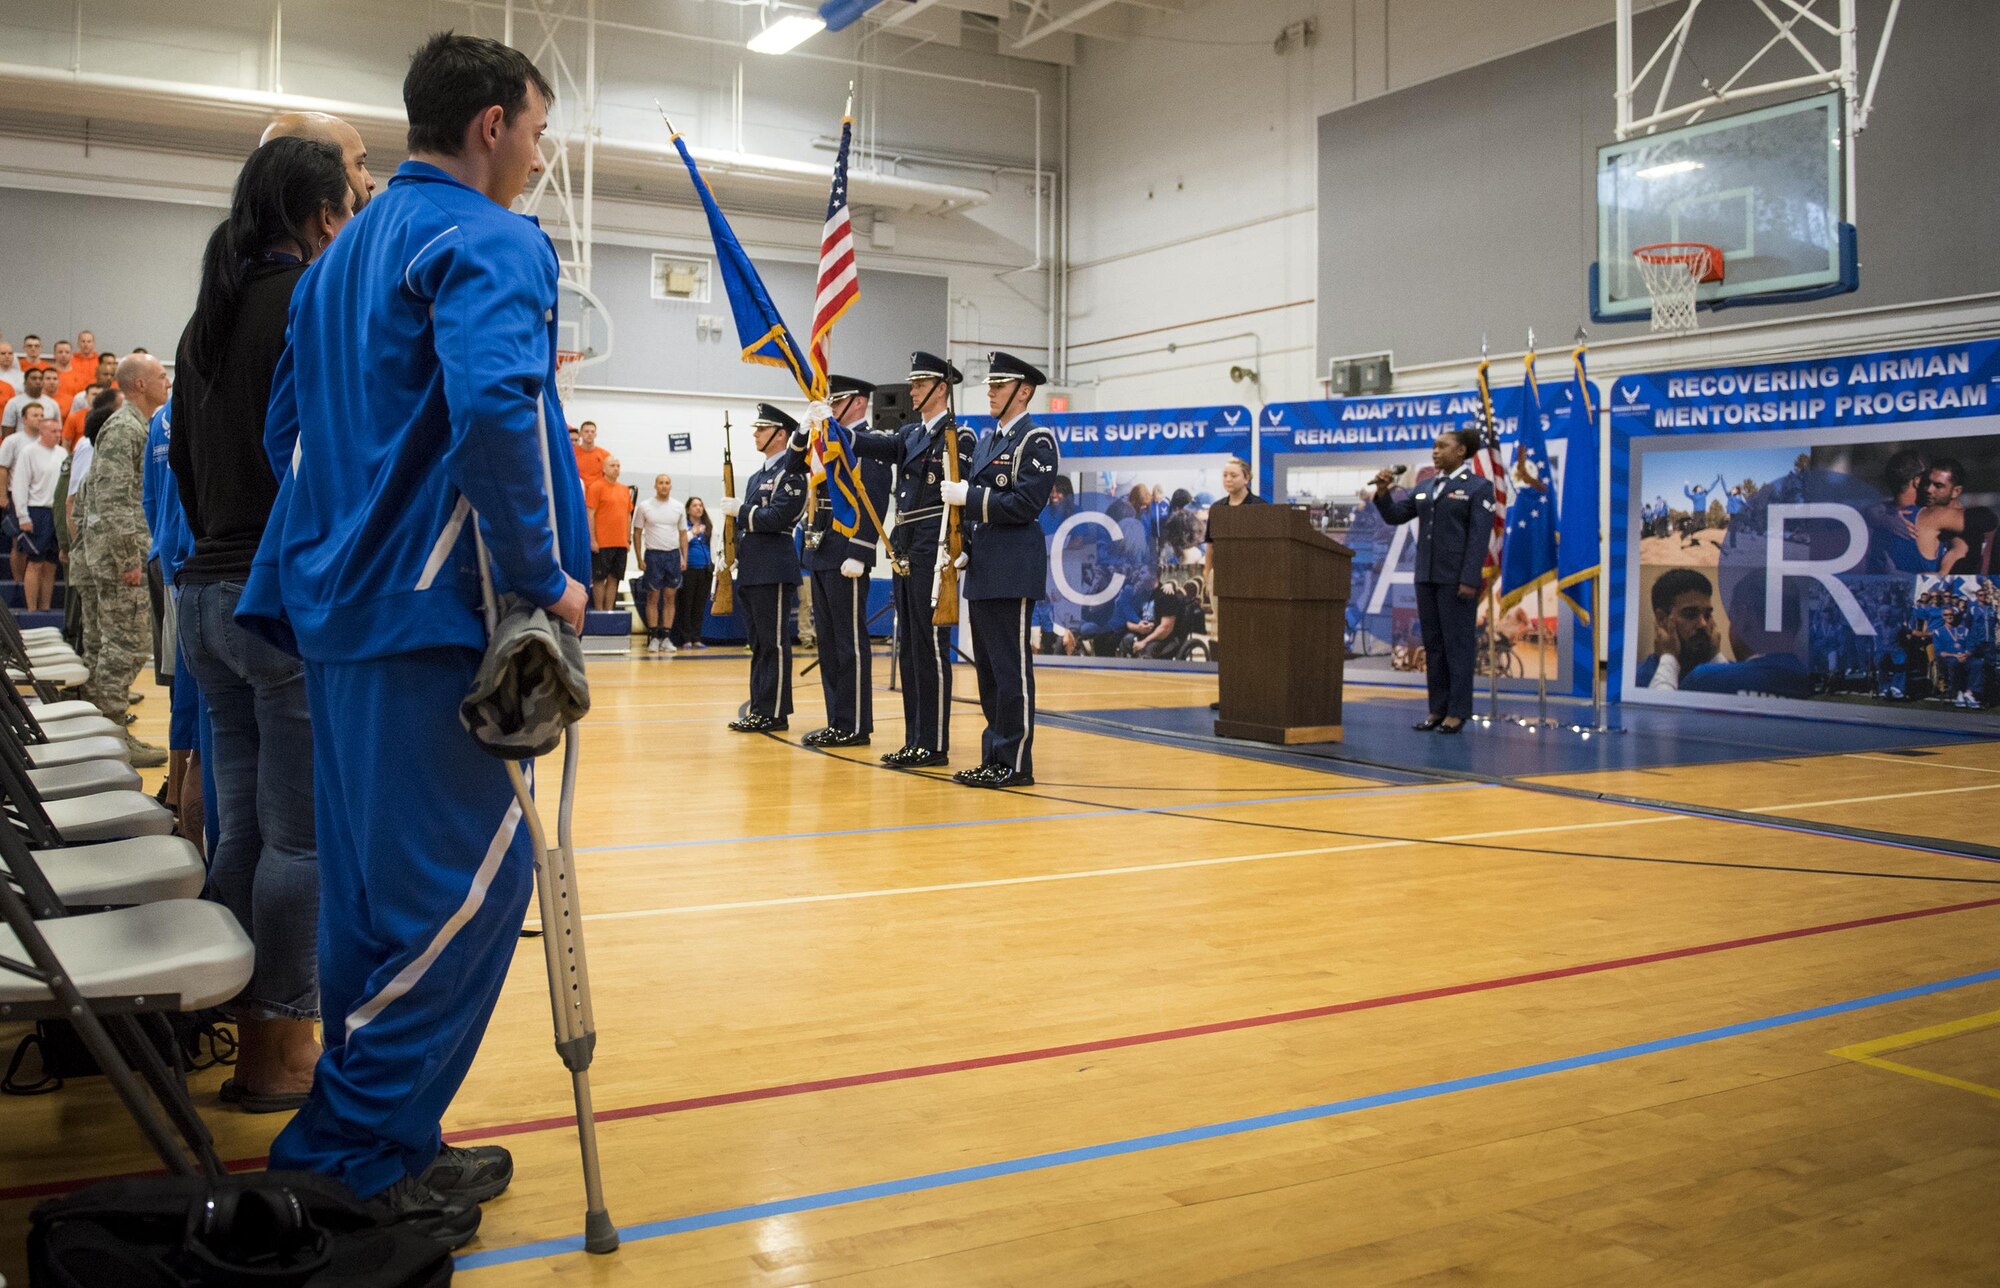 An Honor Guard team presents the colors during the opening ceremonies of this year’s Warrior Care/Games training event at Eglin Air Force Base, Fla., April 24.  The ceremony kicked off a week-long rehabilitative wounded warrior camp as well as a training session for the Air Force Warrior Games athletes. (U.S. Air Force photo/Samuel King Jr.)